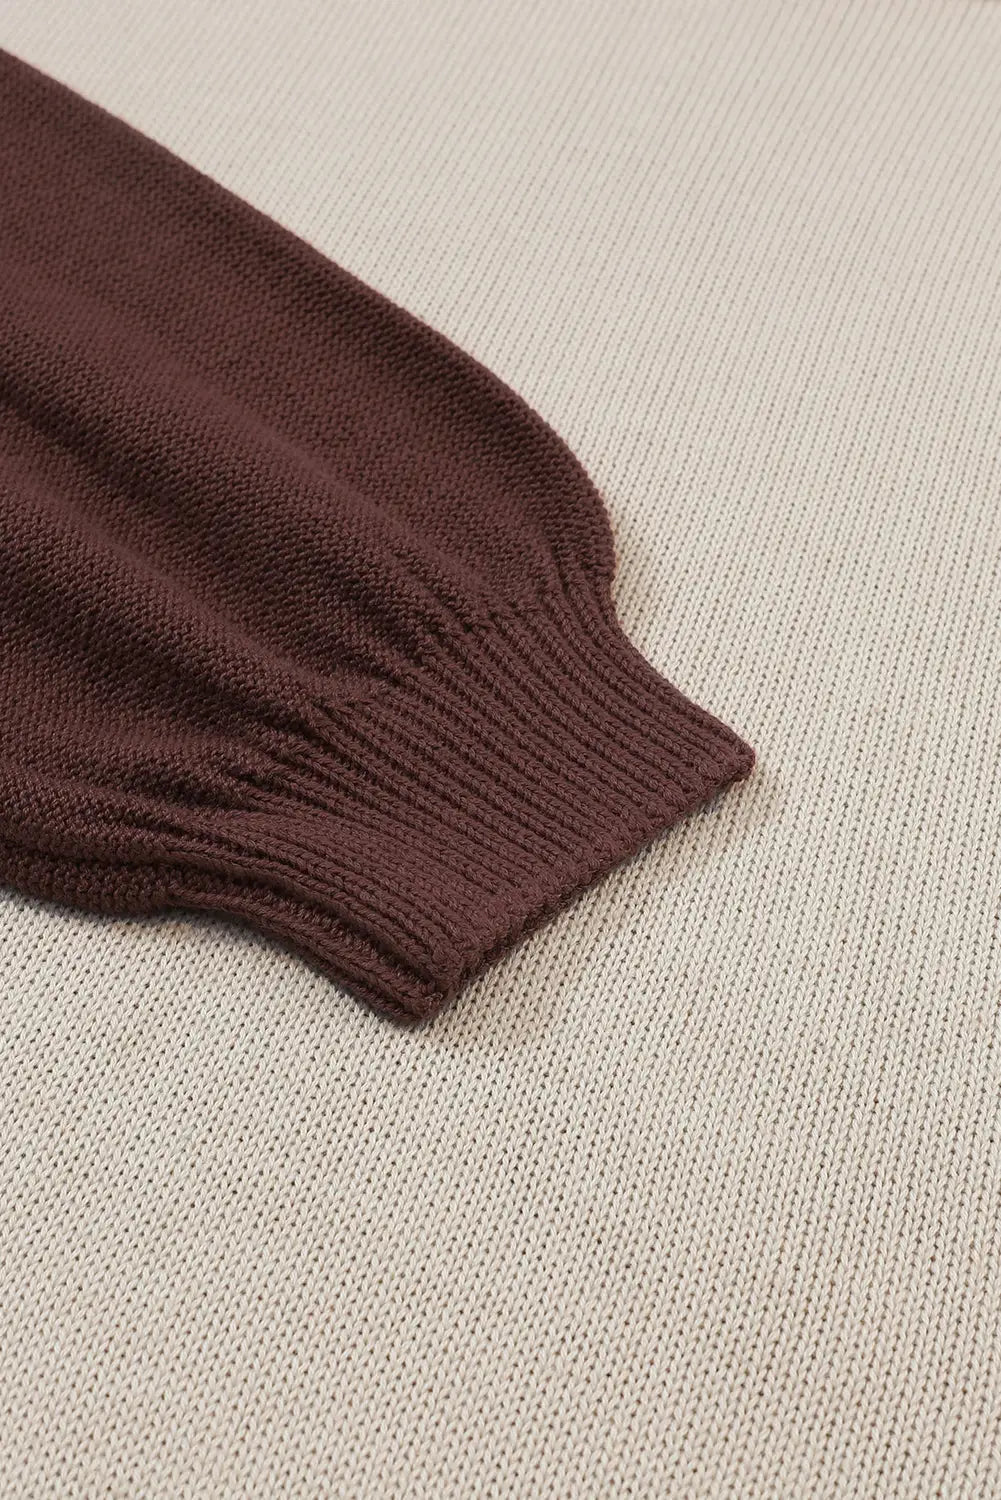 Chicory coffee contrast color exposed seam drop shoulder sweater - tops